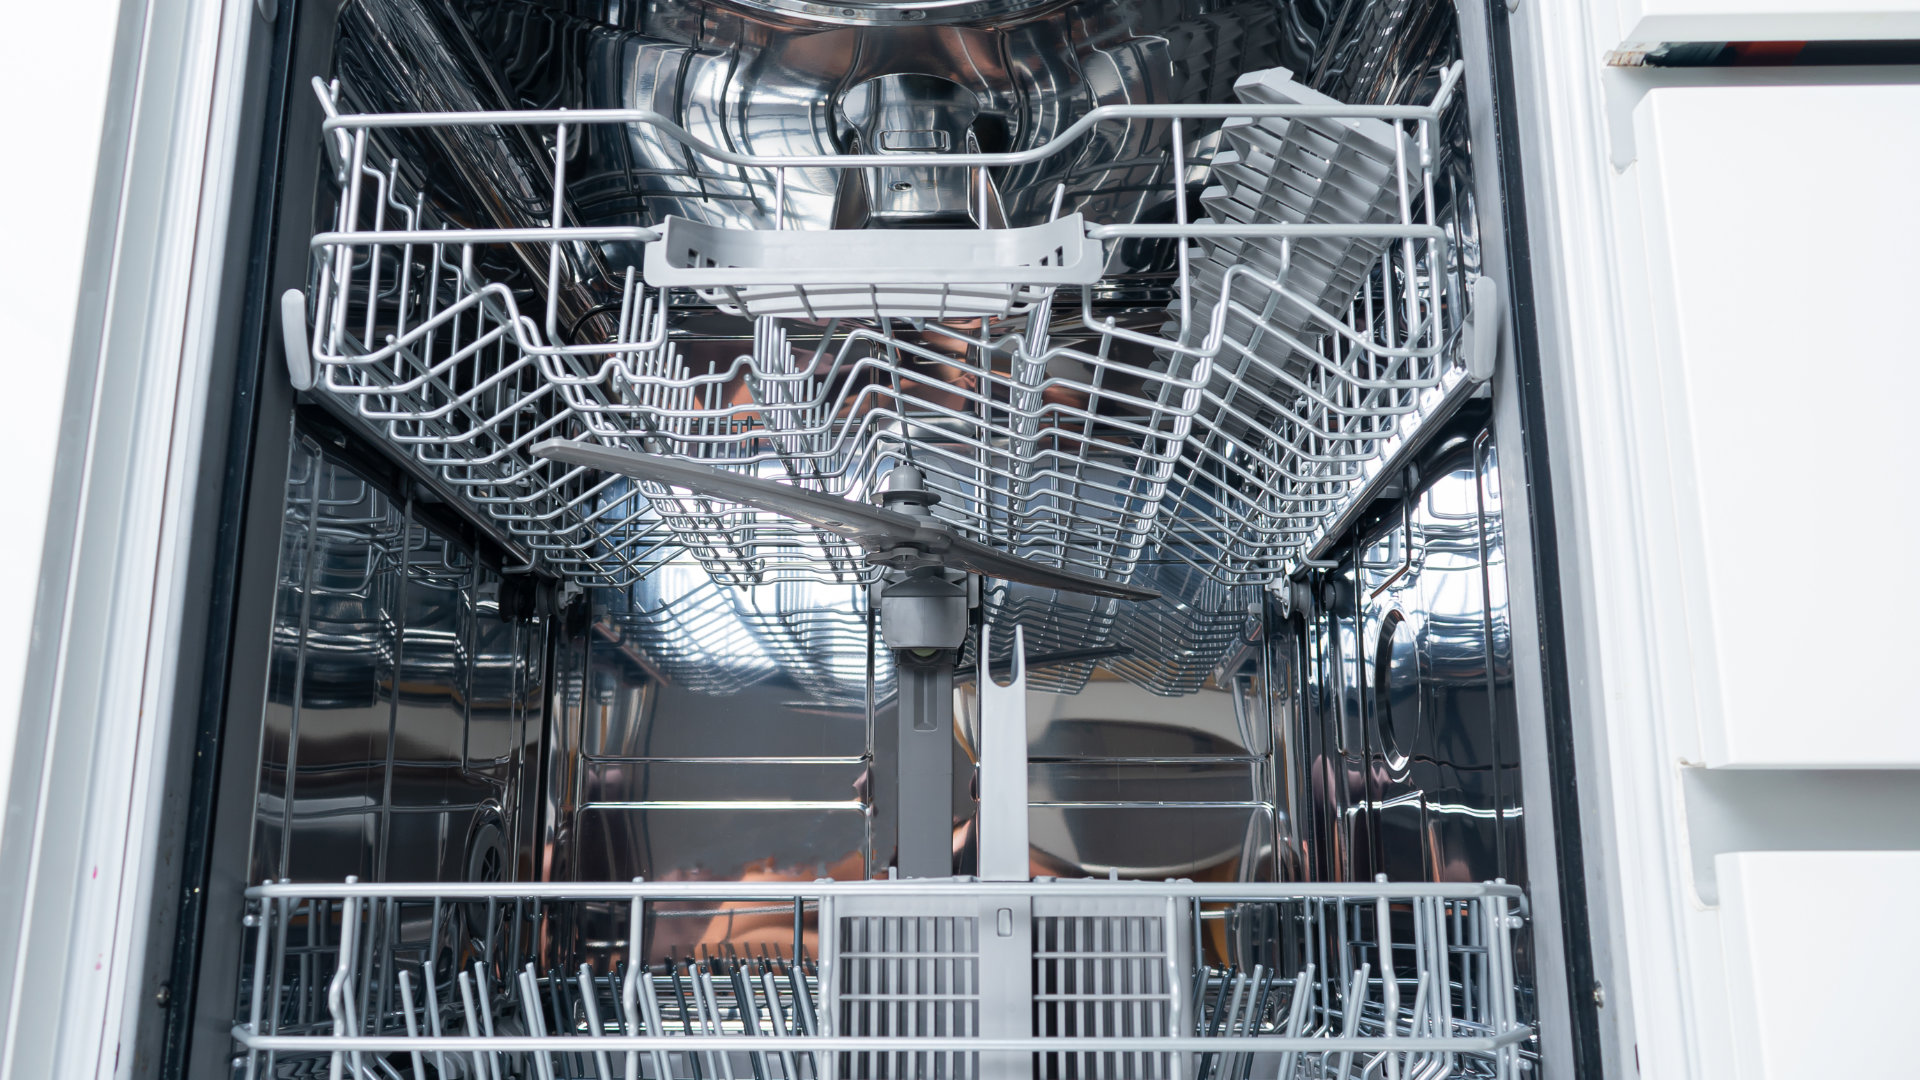 Featured image for “Dishwasher Hums, but No Water? Here’s What To Do”